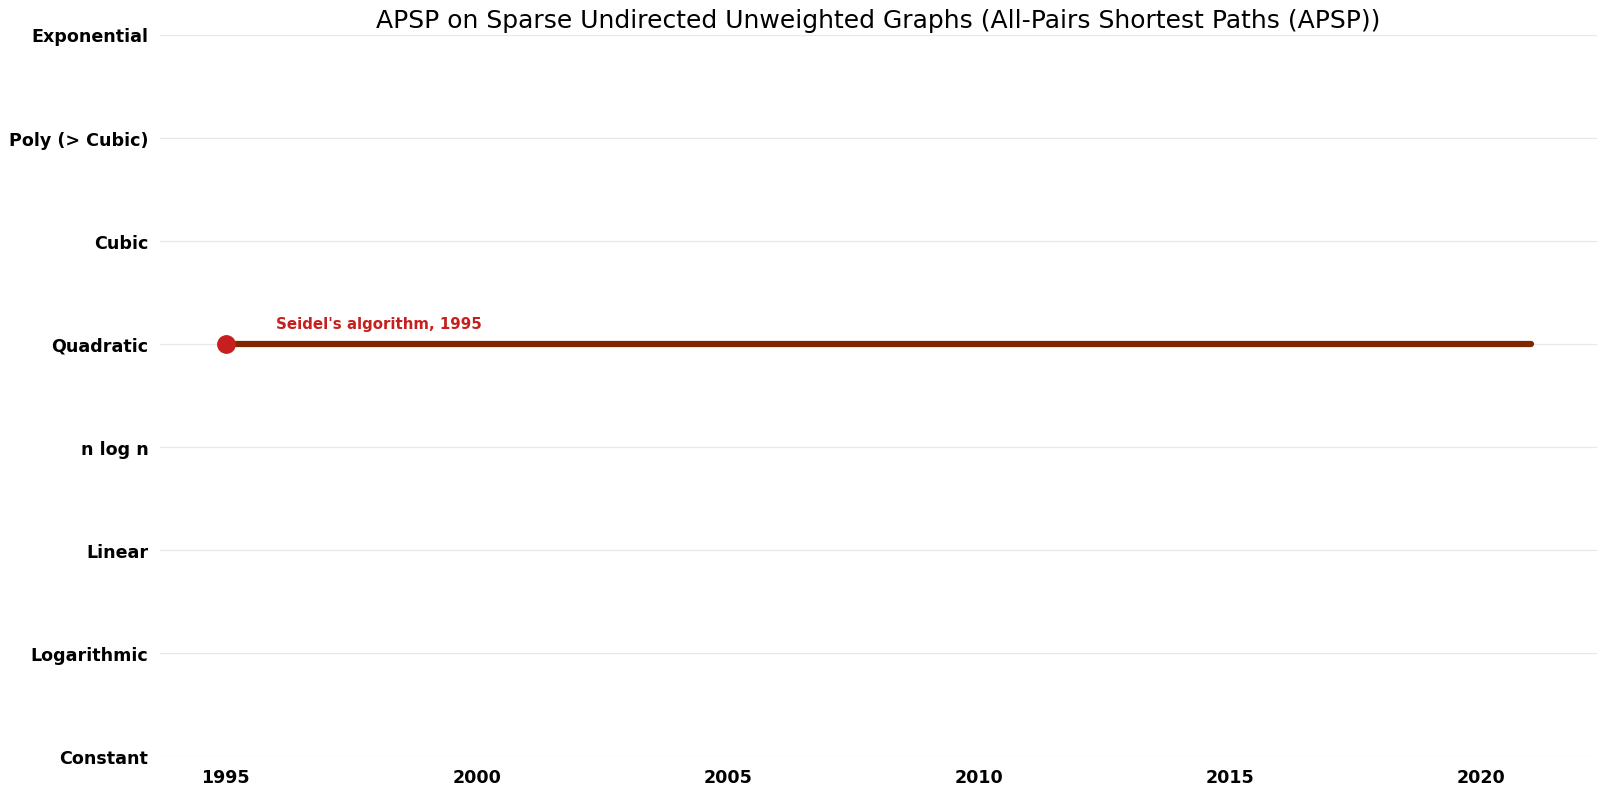 All-Pairs Shortest Paths (APSP) - APSP on Sparse Undirected Unweighted Graphs - Space.png